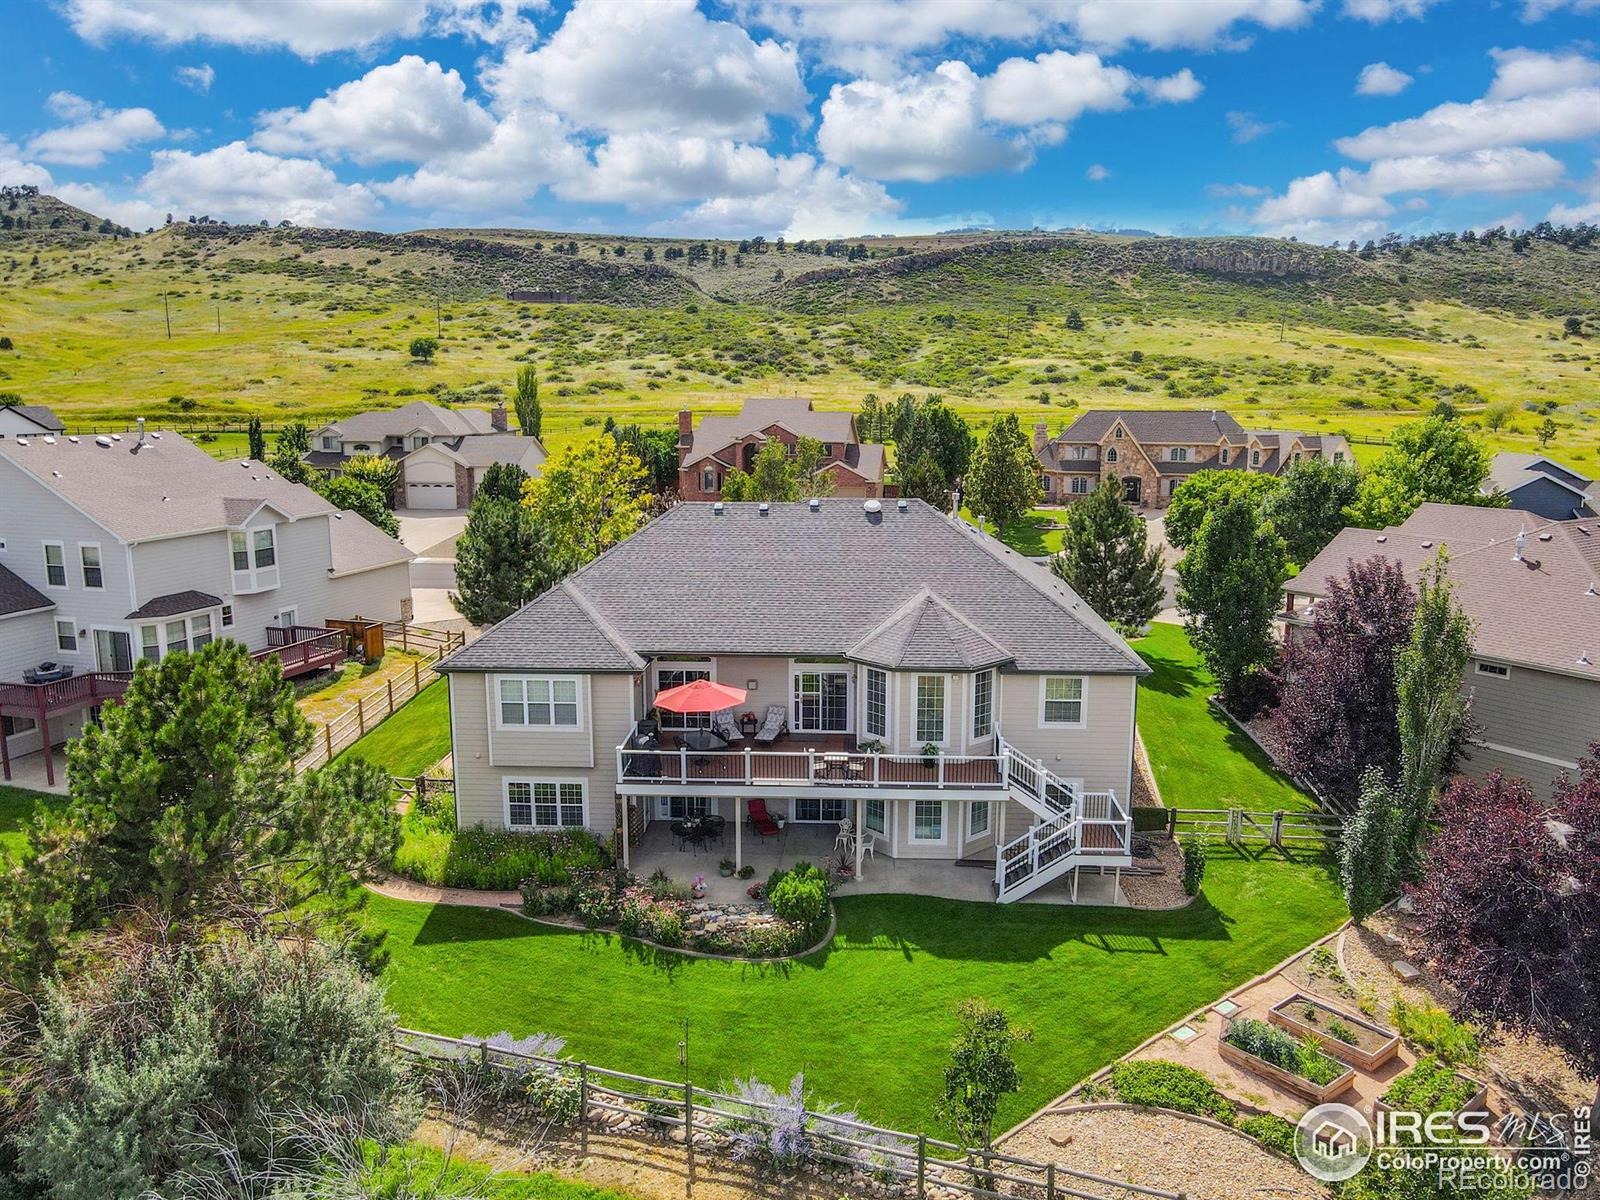 1214  Catalpa Place, fort collins MLS: 4567891003185 Beds: 6 Baths: 5 Price: $1,425,000